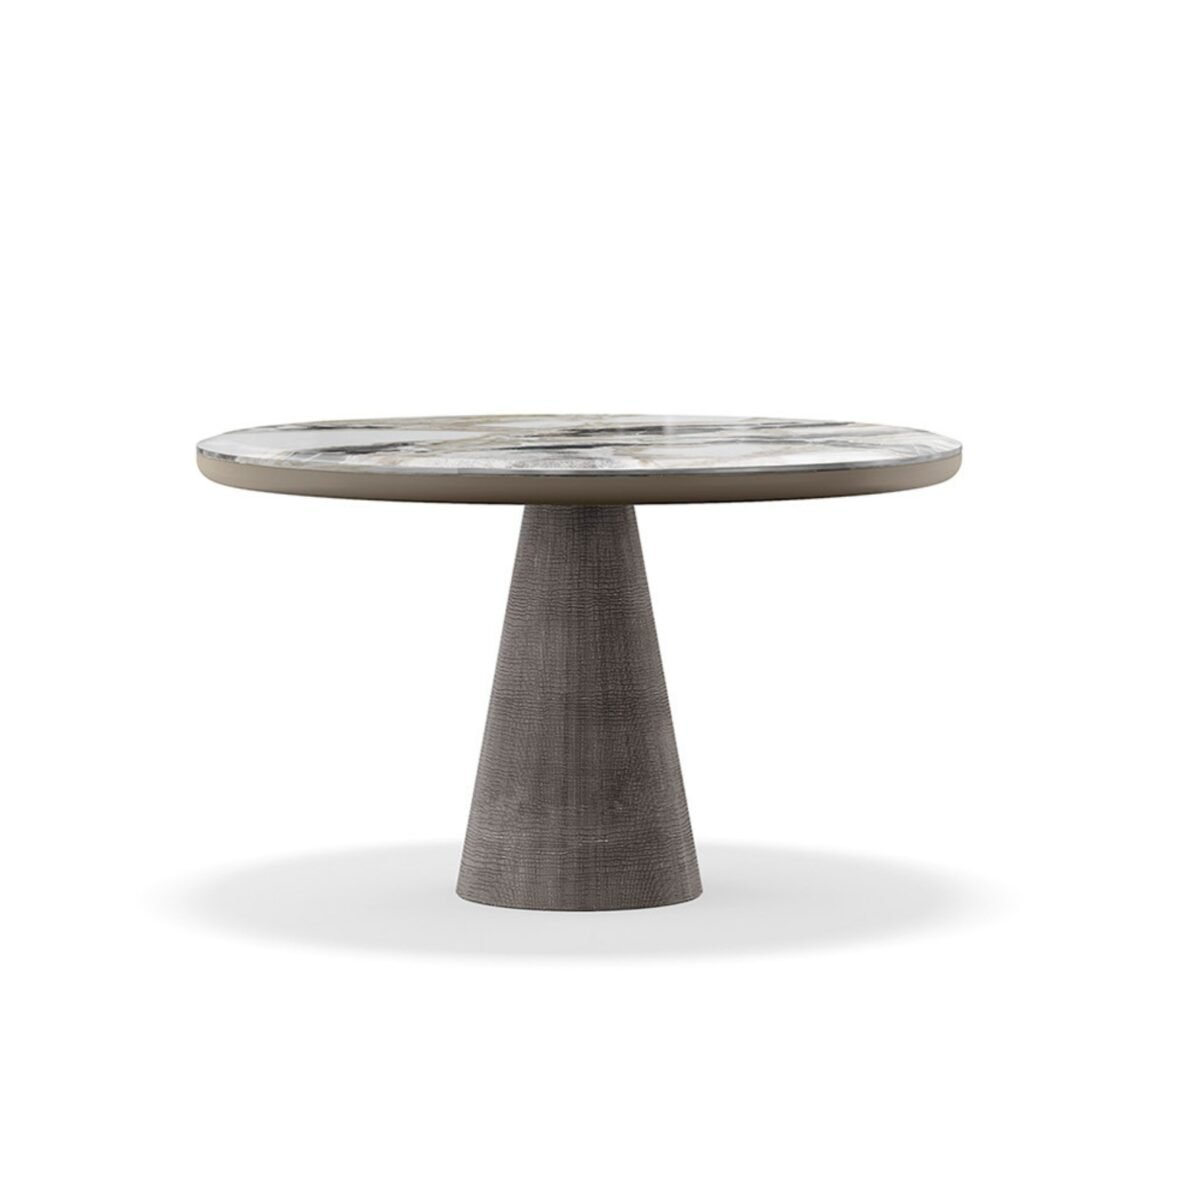 Ceppi the Italian Touch Geo small round table